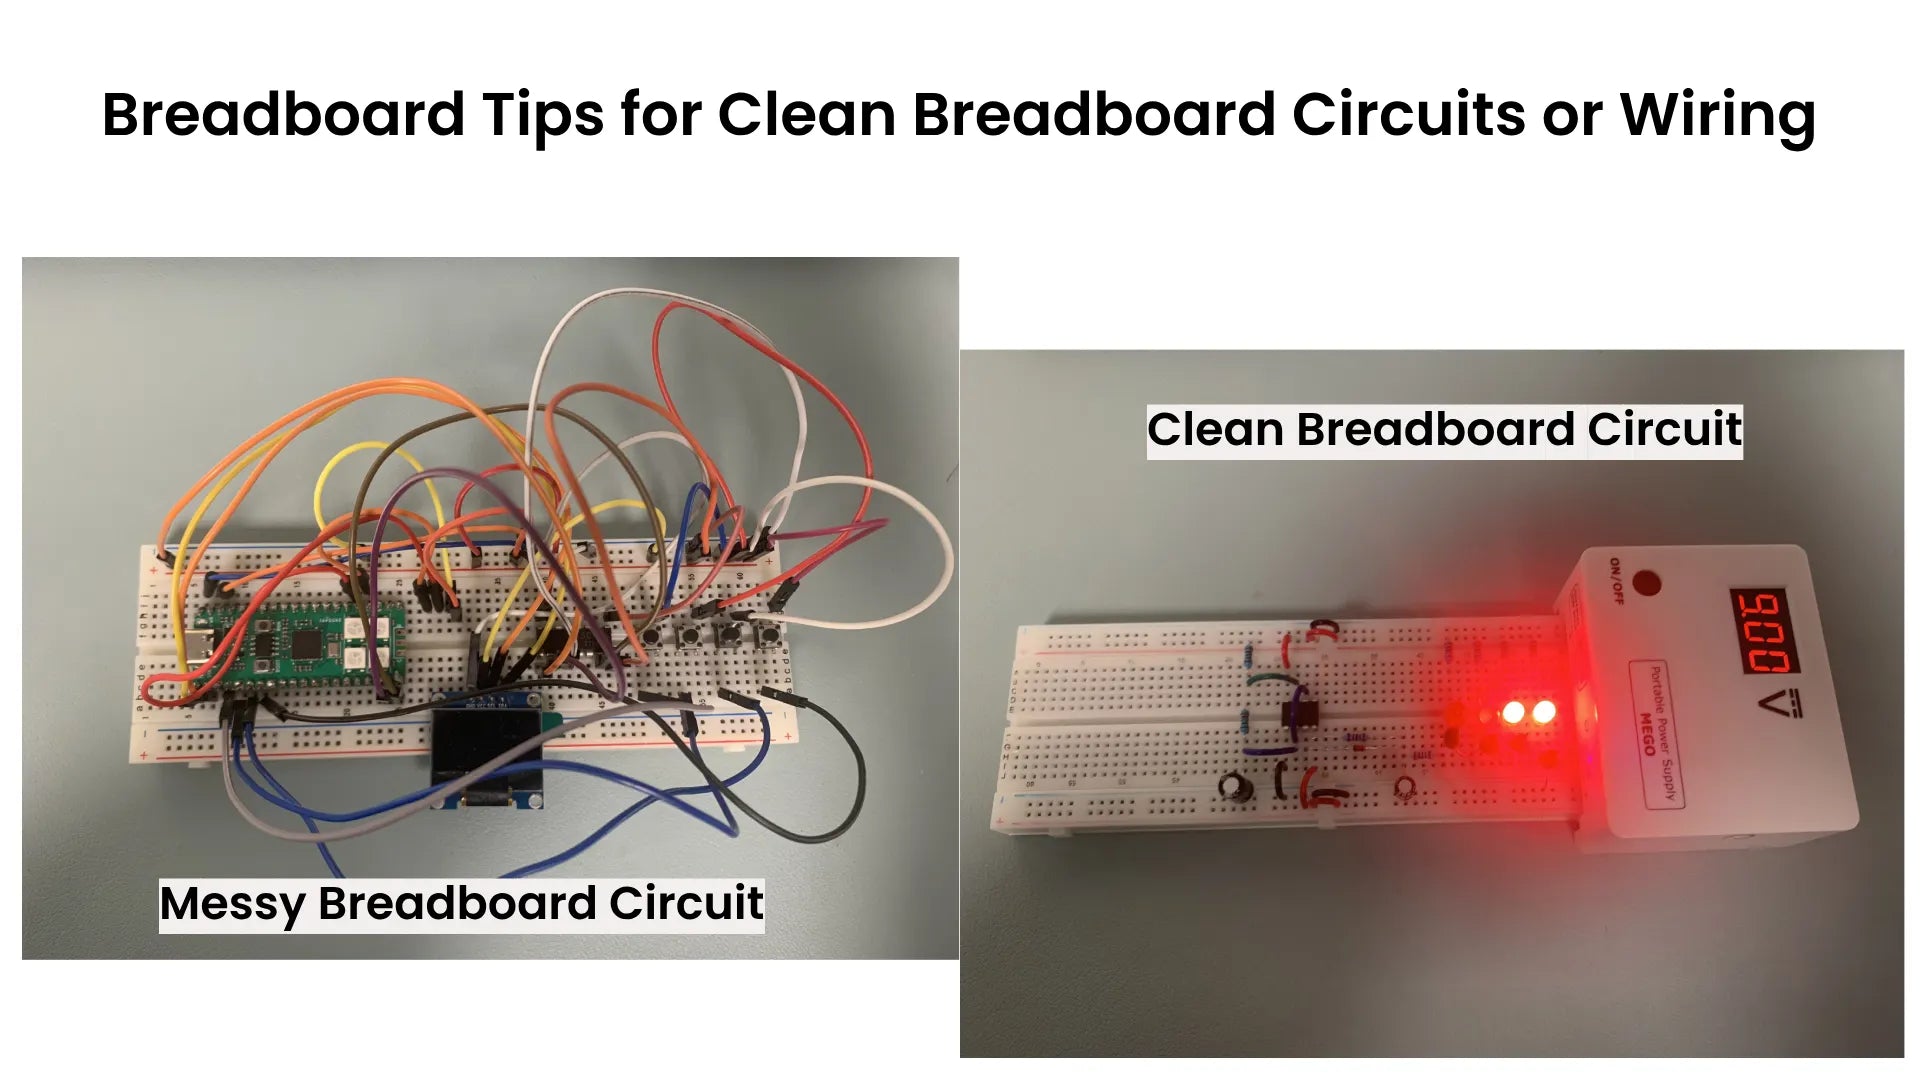 Breadboard Tips for Clean Breadboard Circuits or Wiring 